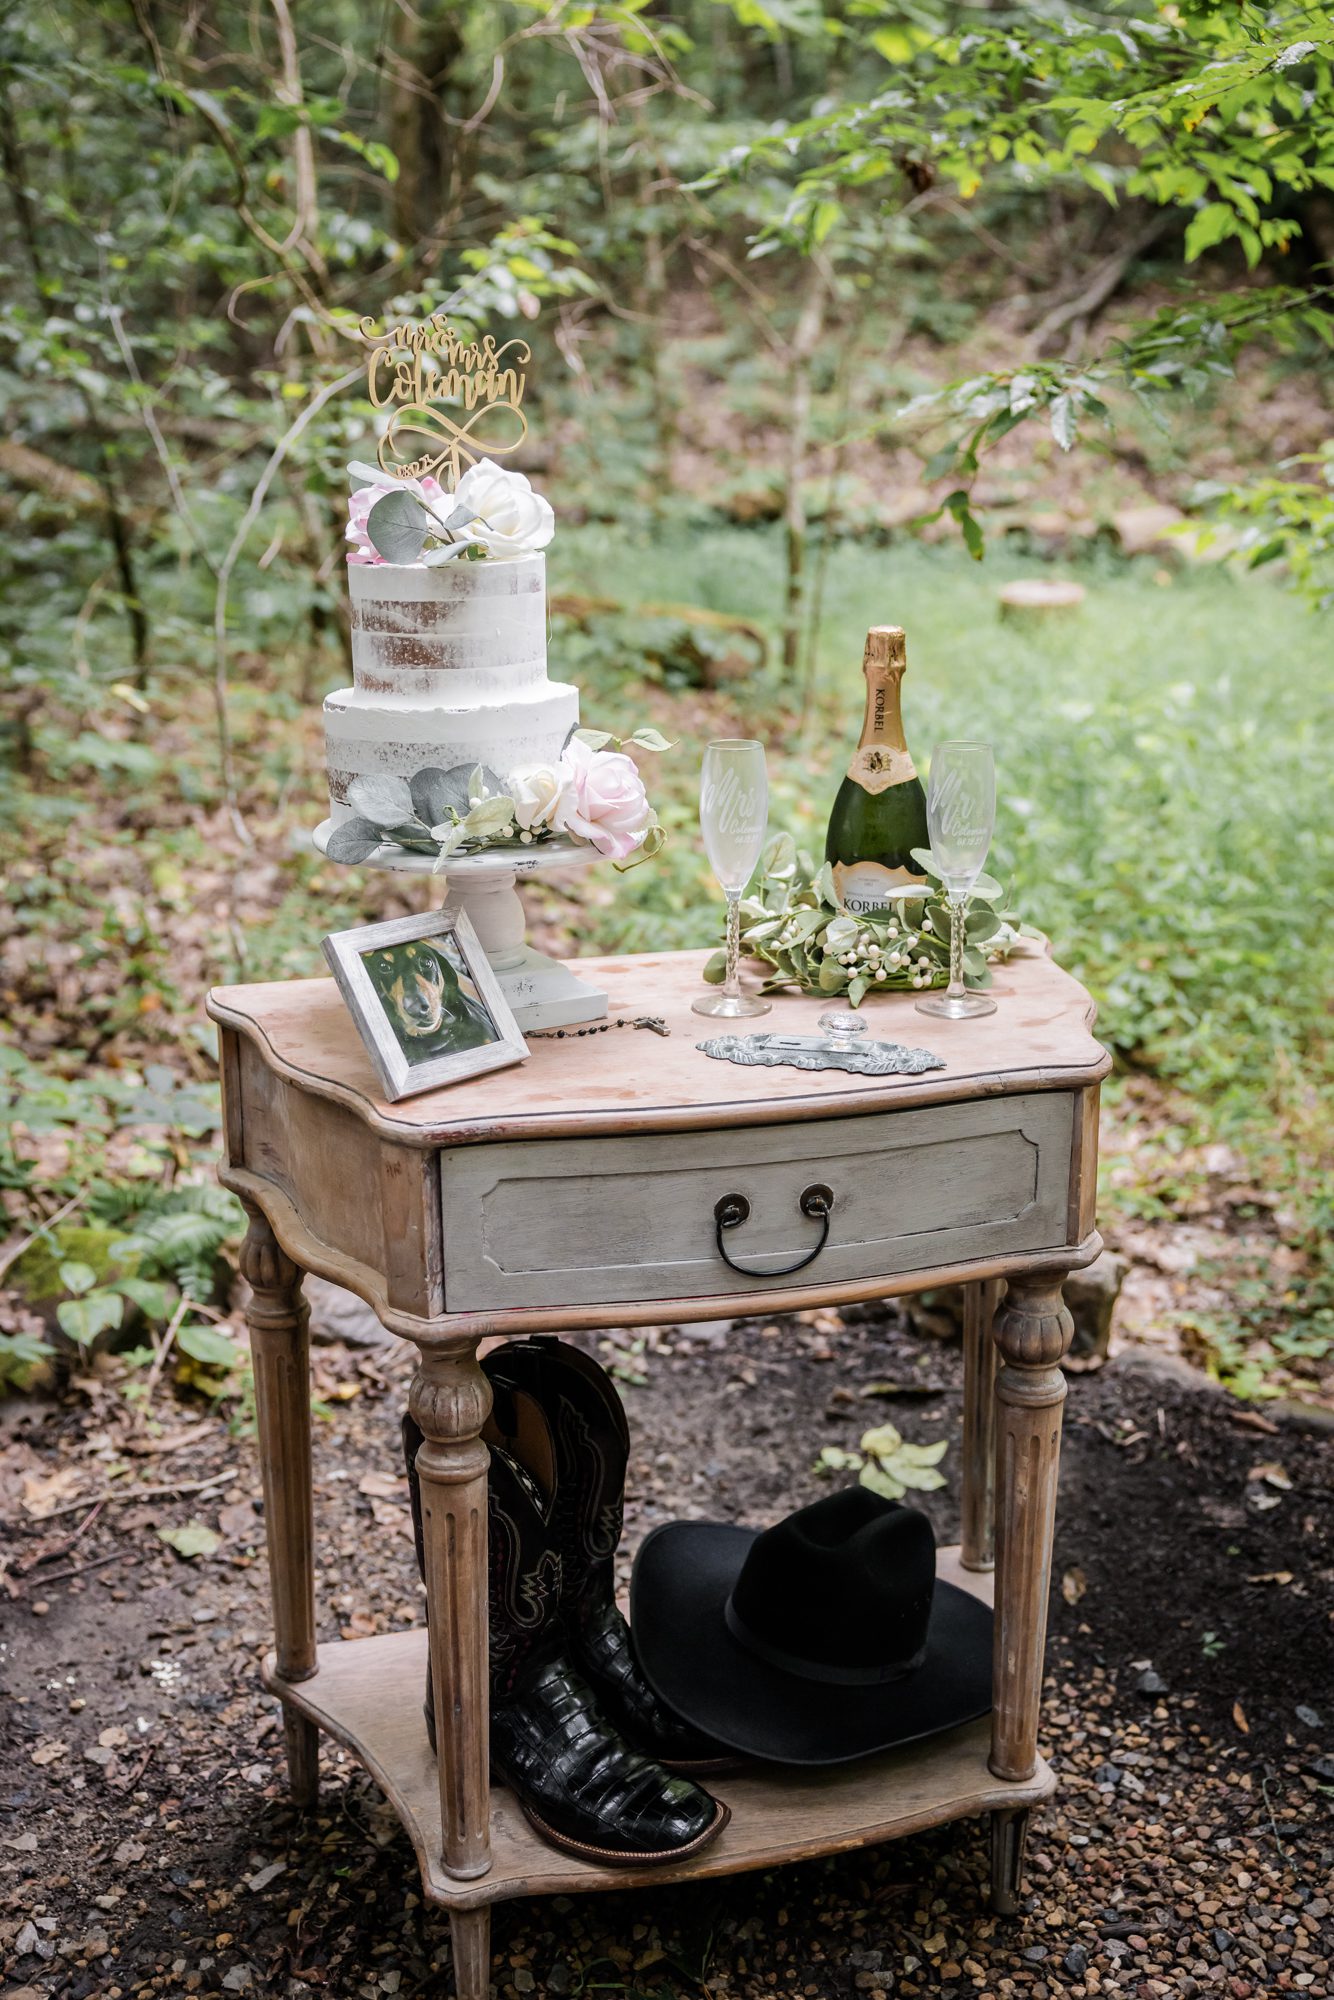 Outdoor cake and memory table